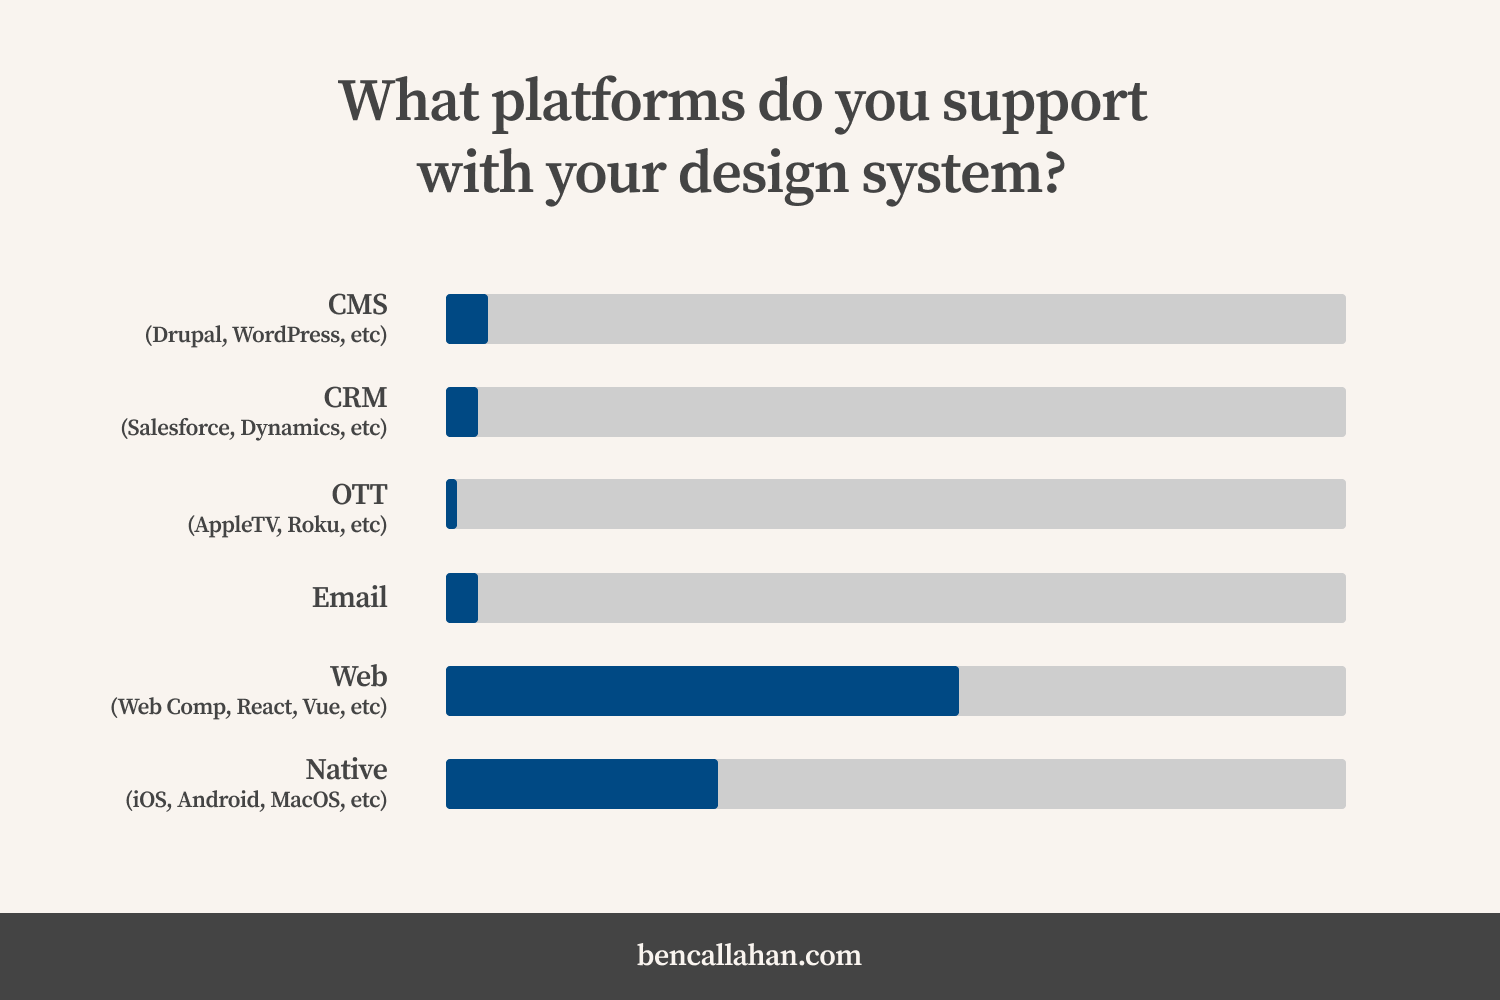 In response to the question, “Which platforms do you support”: over 85% of respondents reported that their design system supports either web or native platforms.